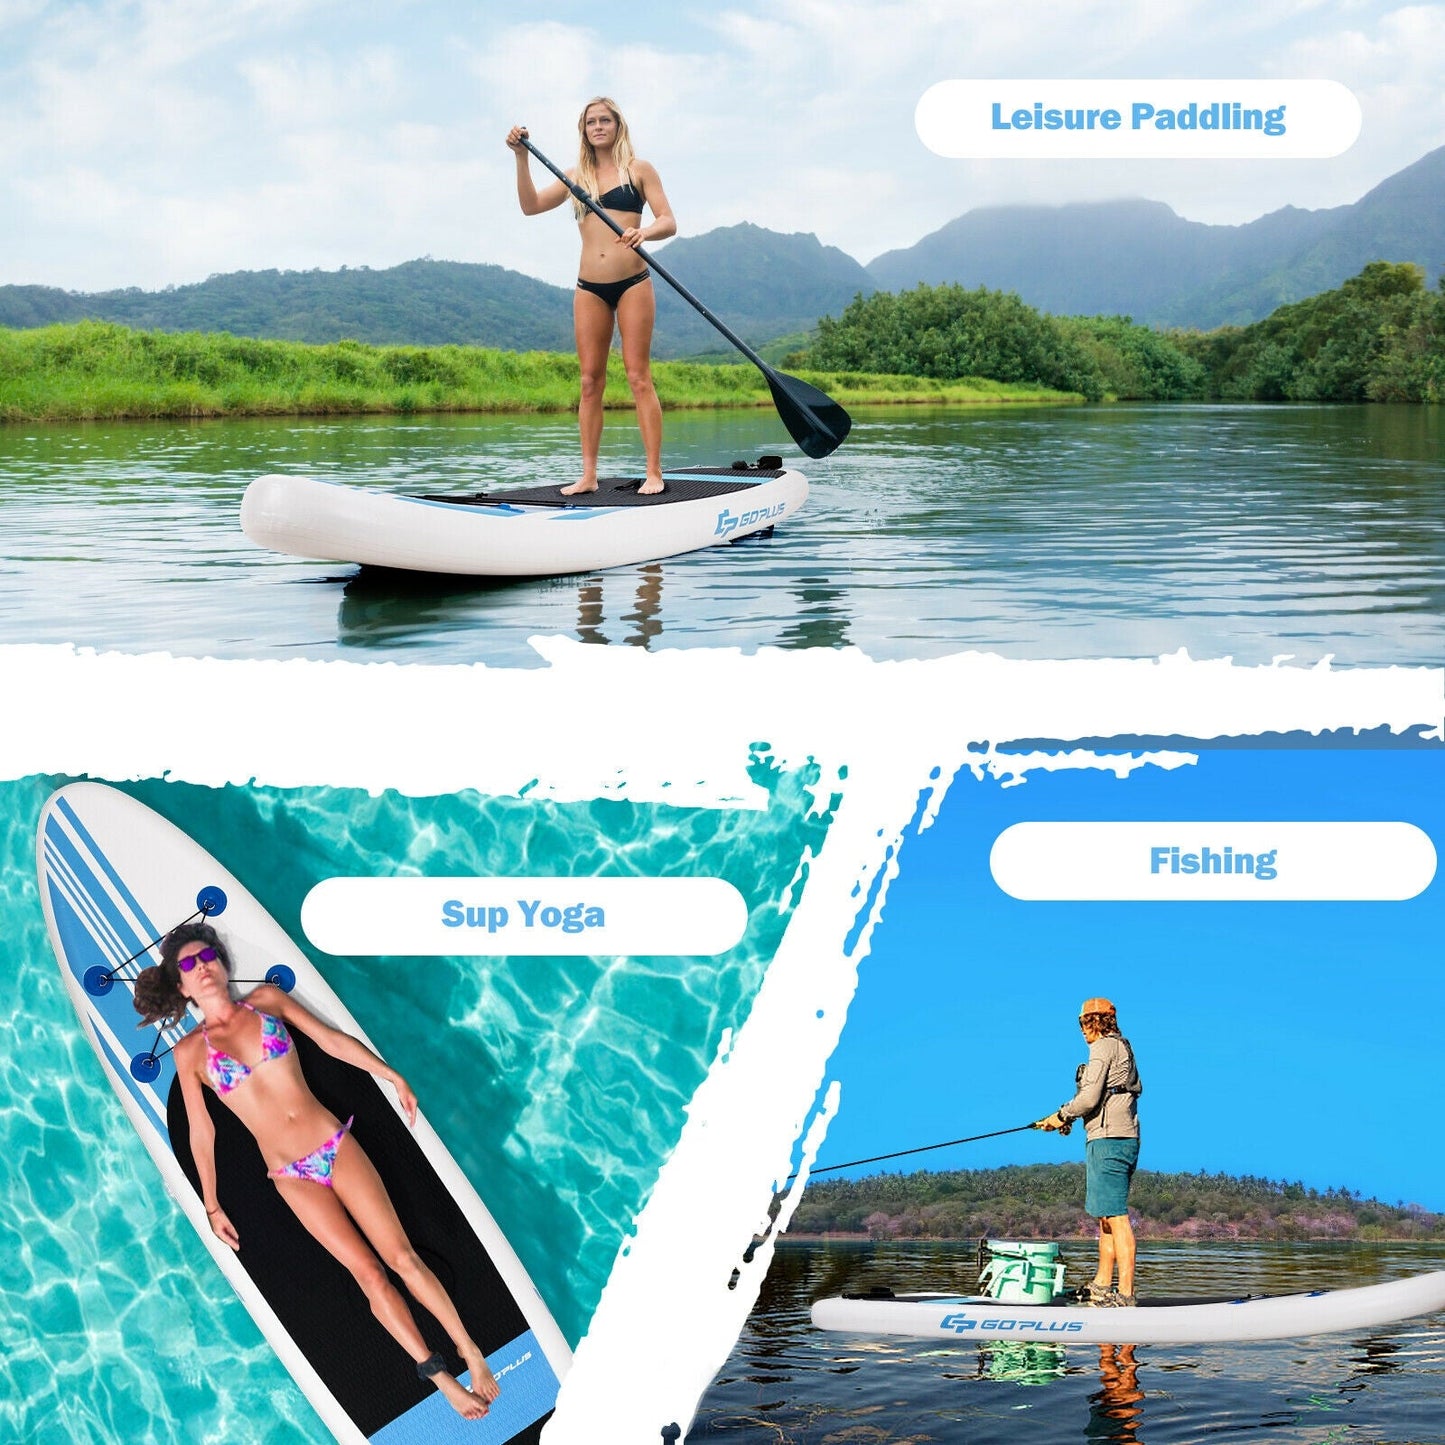 10 Feet Inflatable Stand Up Paddle Board with Carry Bag at Gallery Canada